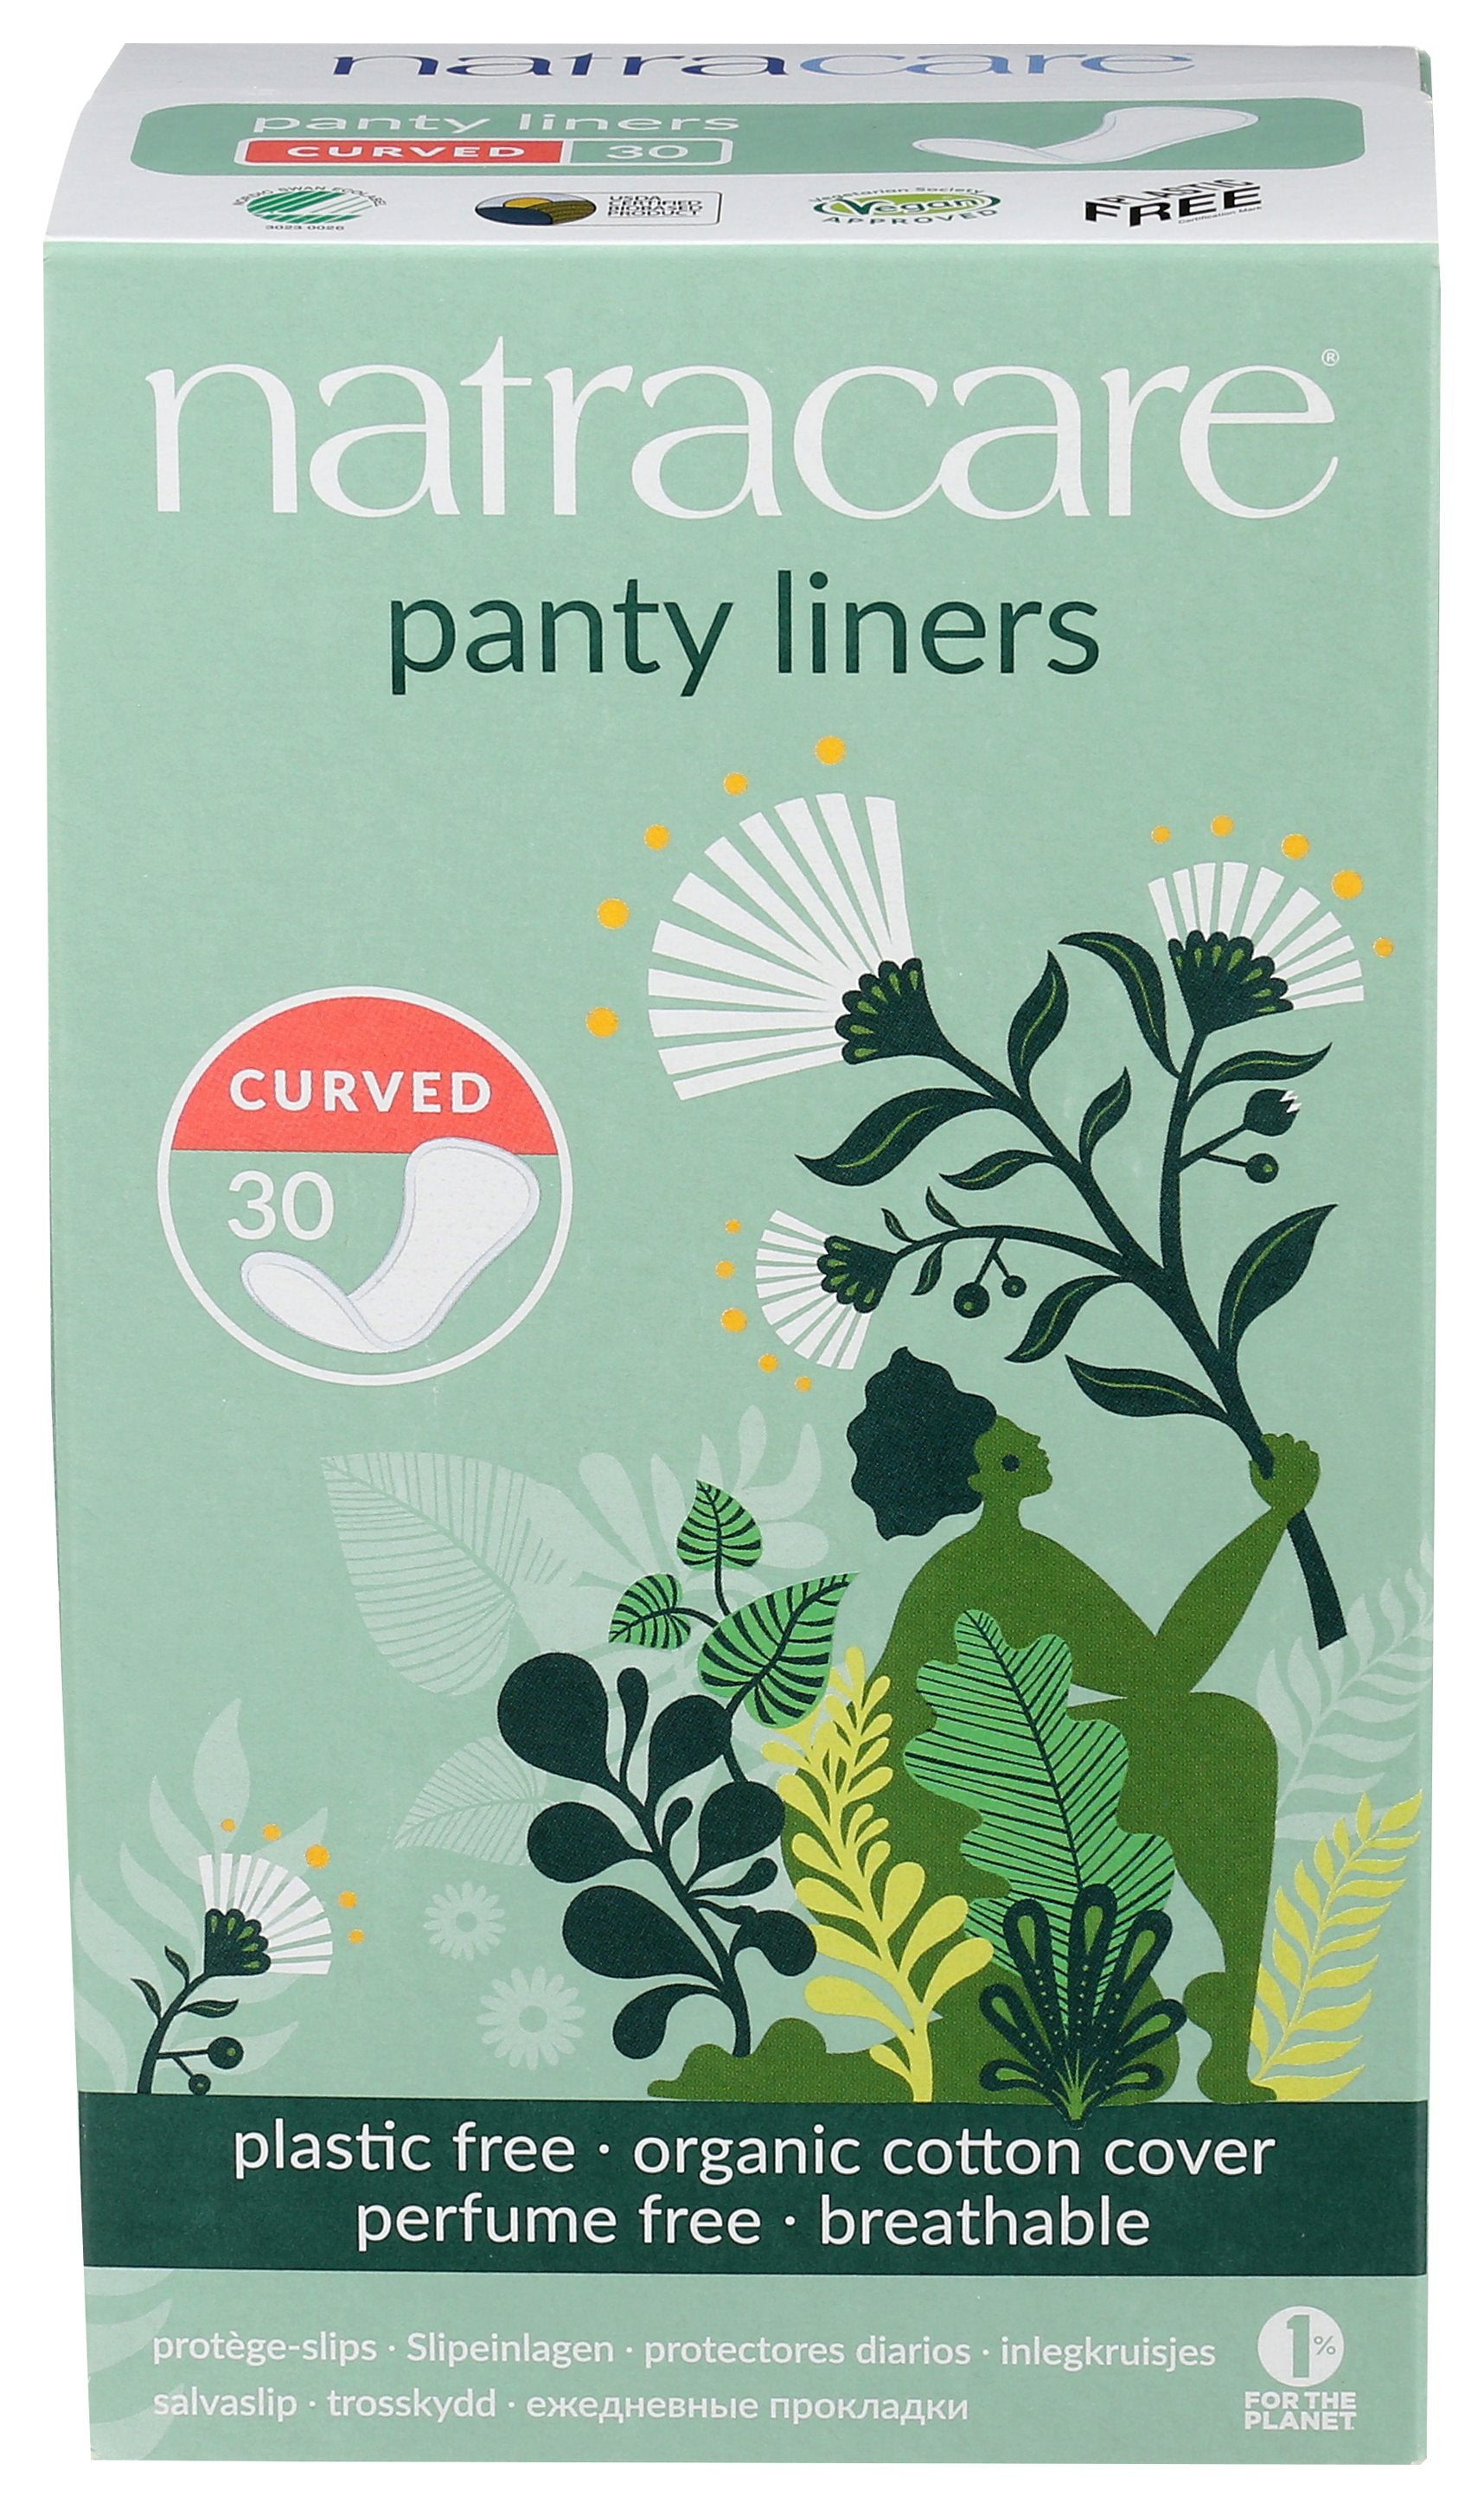 NATRACARE PANTY LINER CURVED - Case of 4